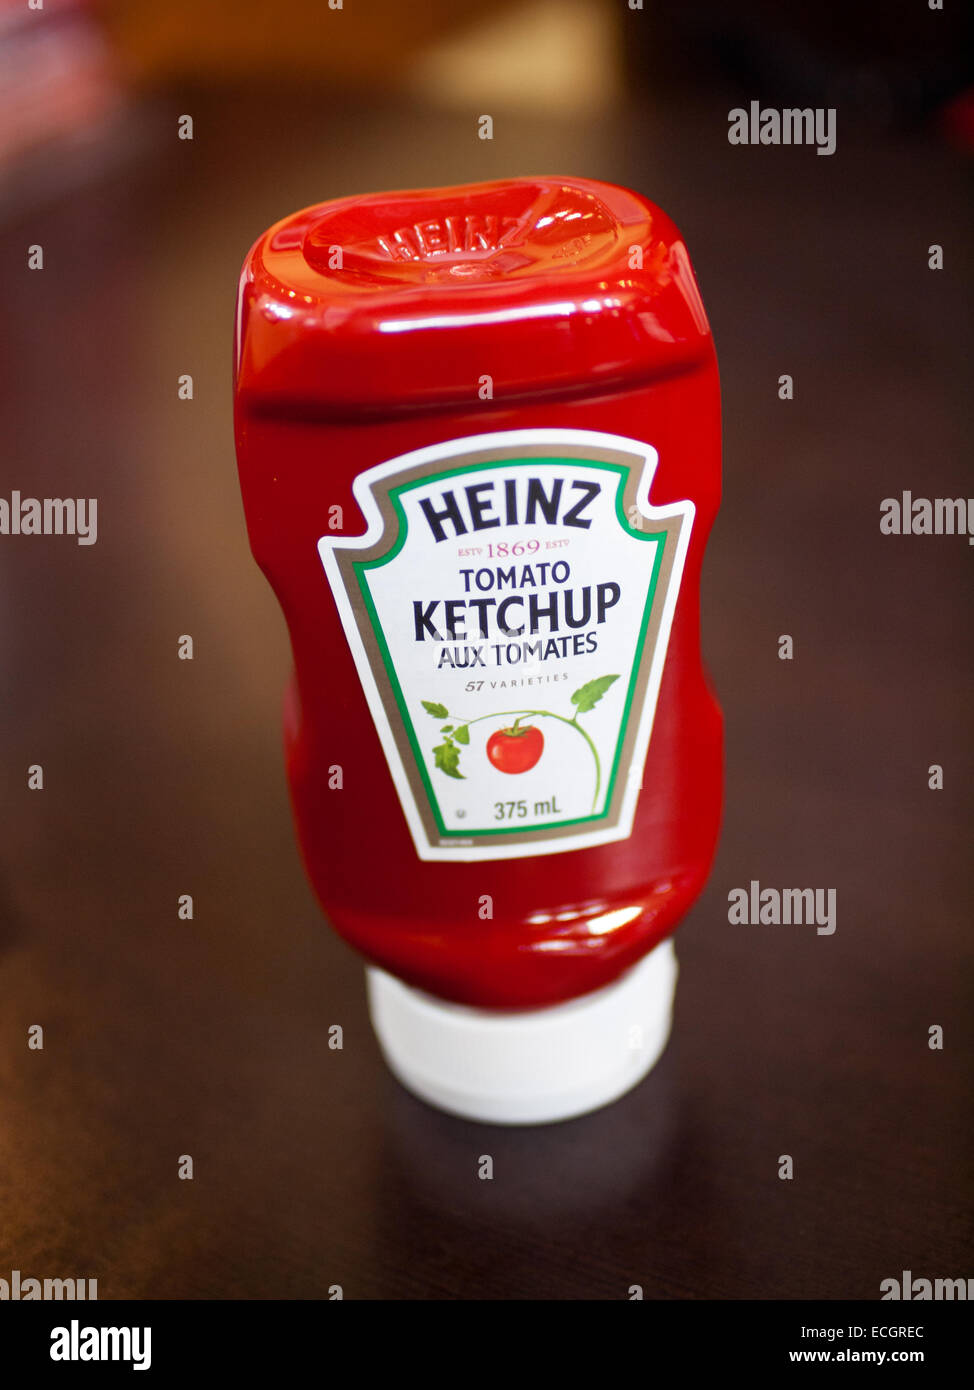 An upside-down Heinz Tomato Ketchup bottle. Canadian packaging with French and English labels is shown. Stock Photo